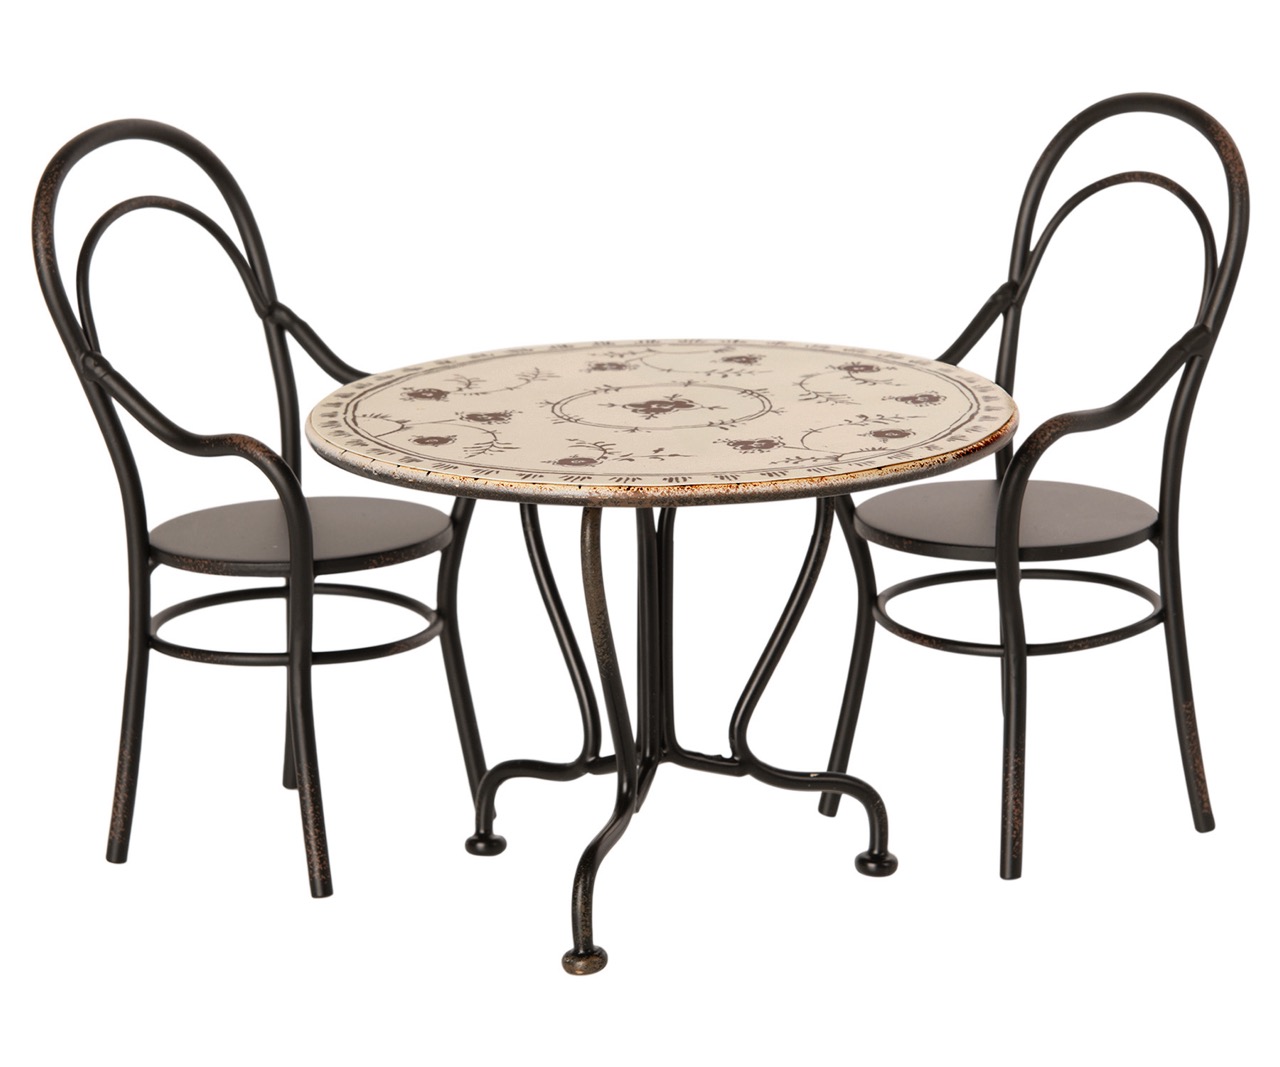 maileg dining table set with 2 chairs